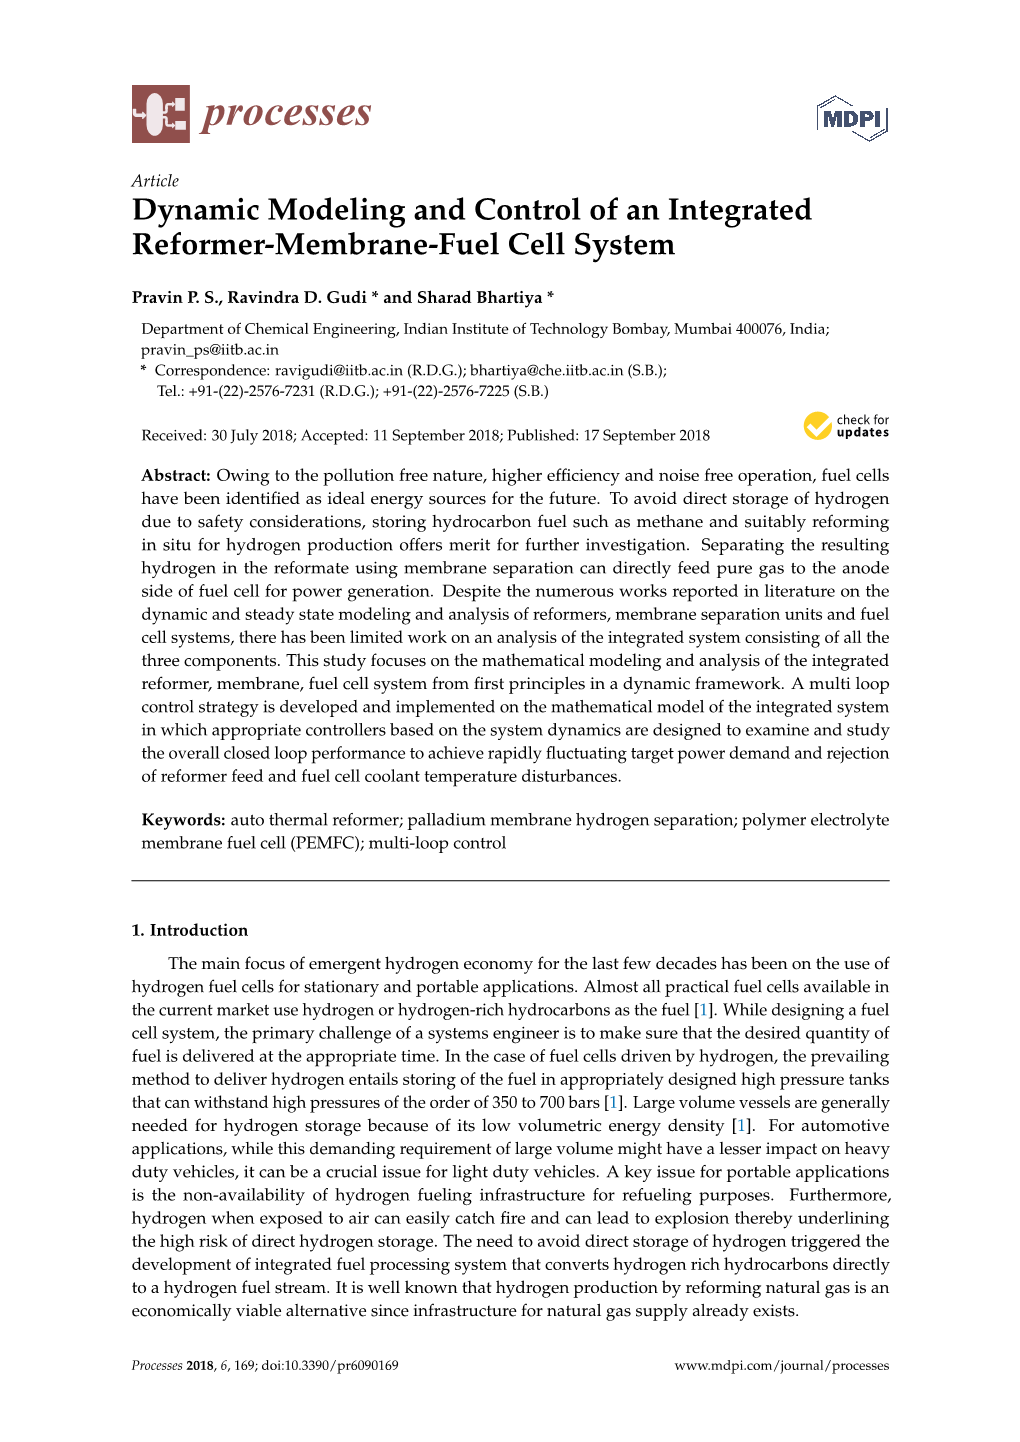 Dynamic Modeling and Control of an Integrated Reformer-Membrane-Fuel Cell System